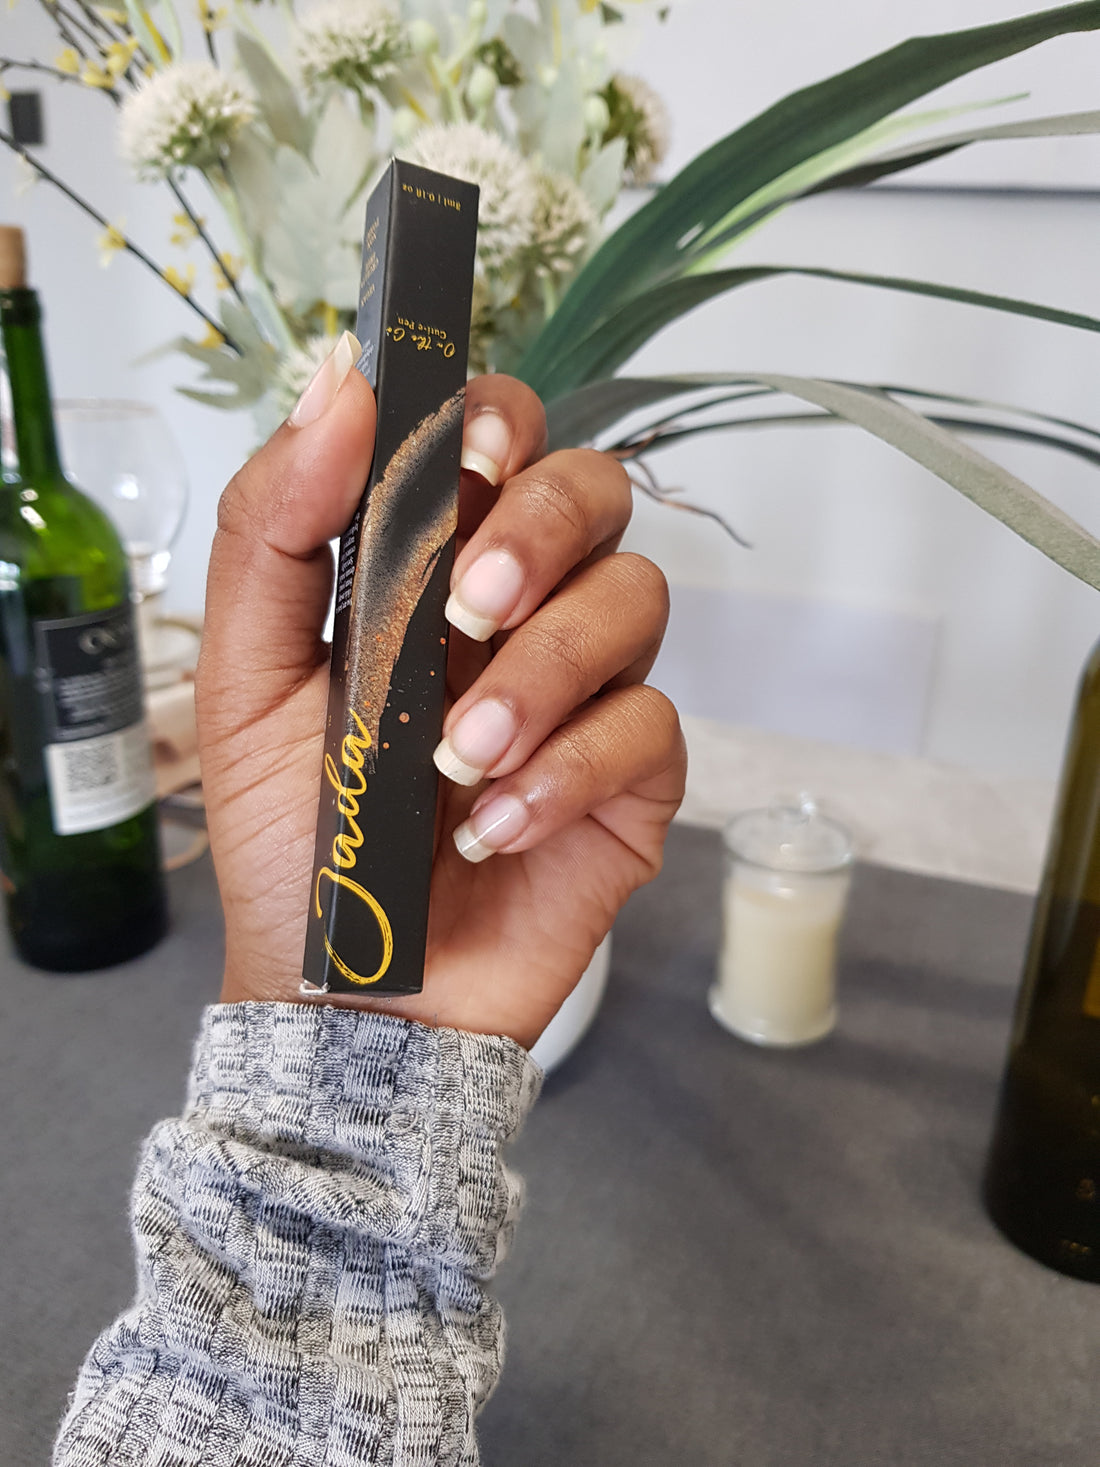 Healthy Habits for Beautiful Nails: How Diet and Lifestyle Affect Nail Health